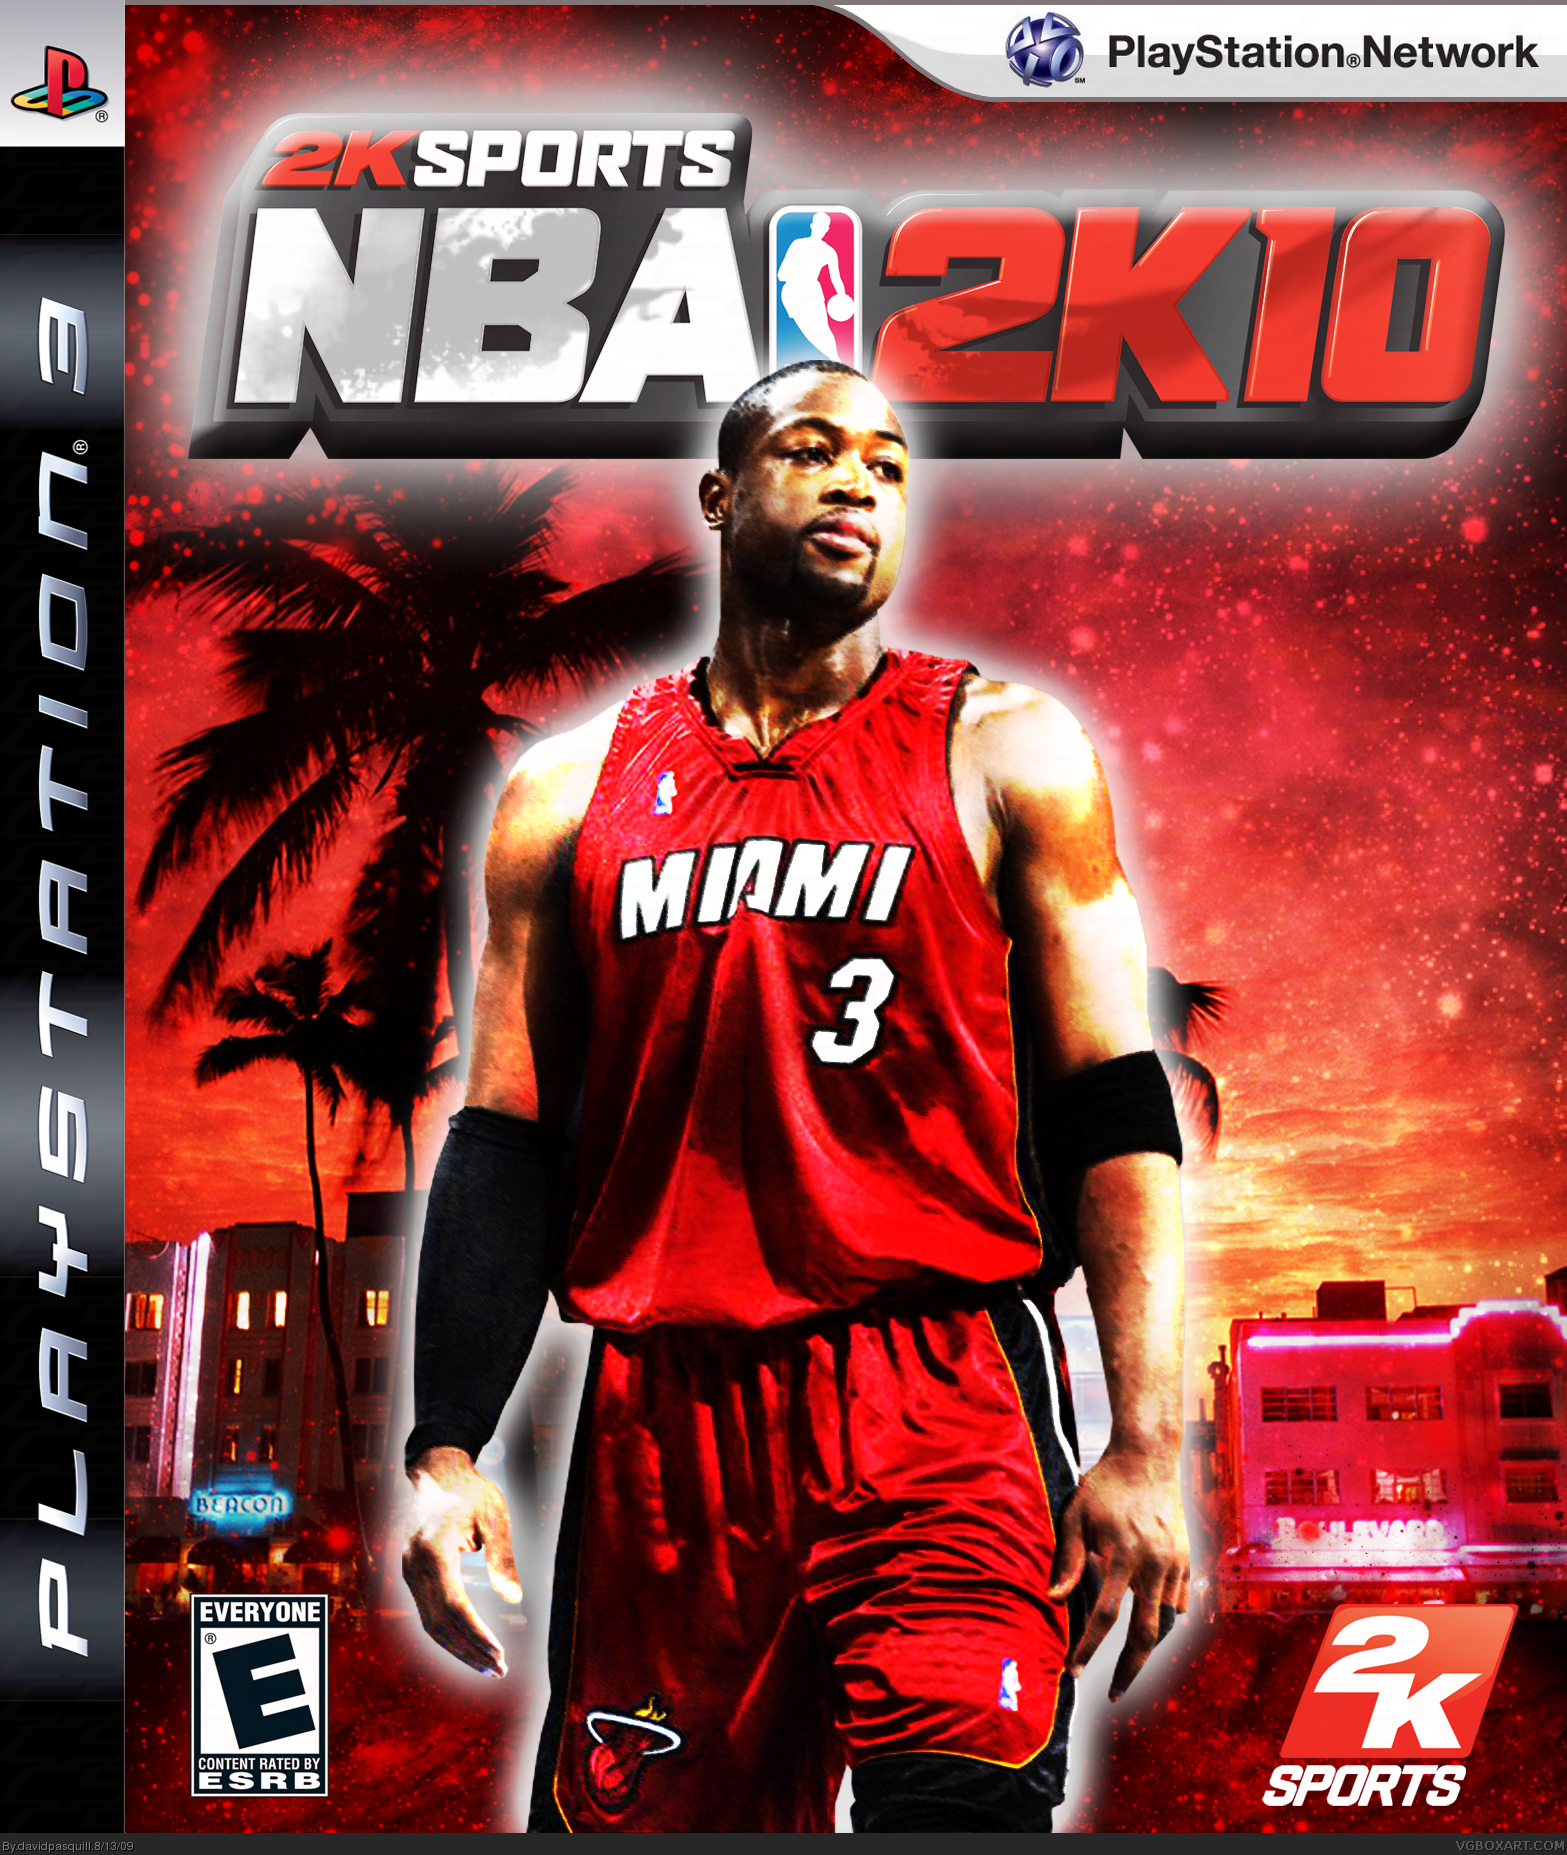 Viewing full size NBA 2K10 box cover